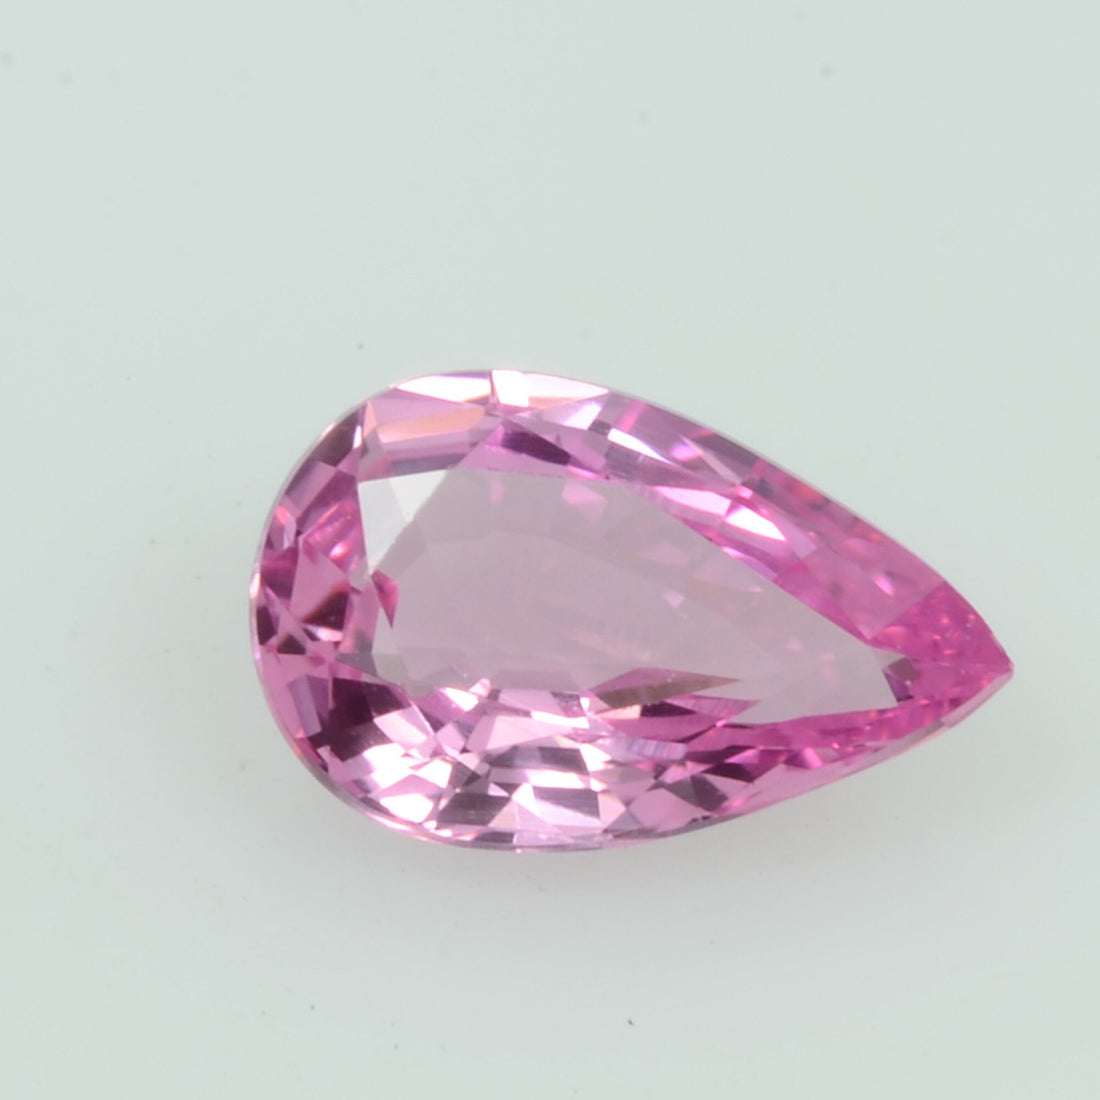 0.97 cts Natural Pink Sapphire Loose Gemstone Pear Cut